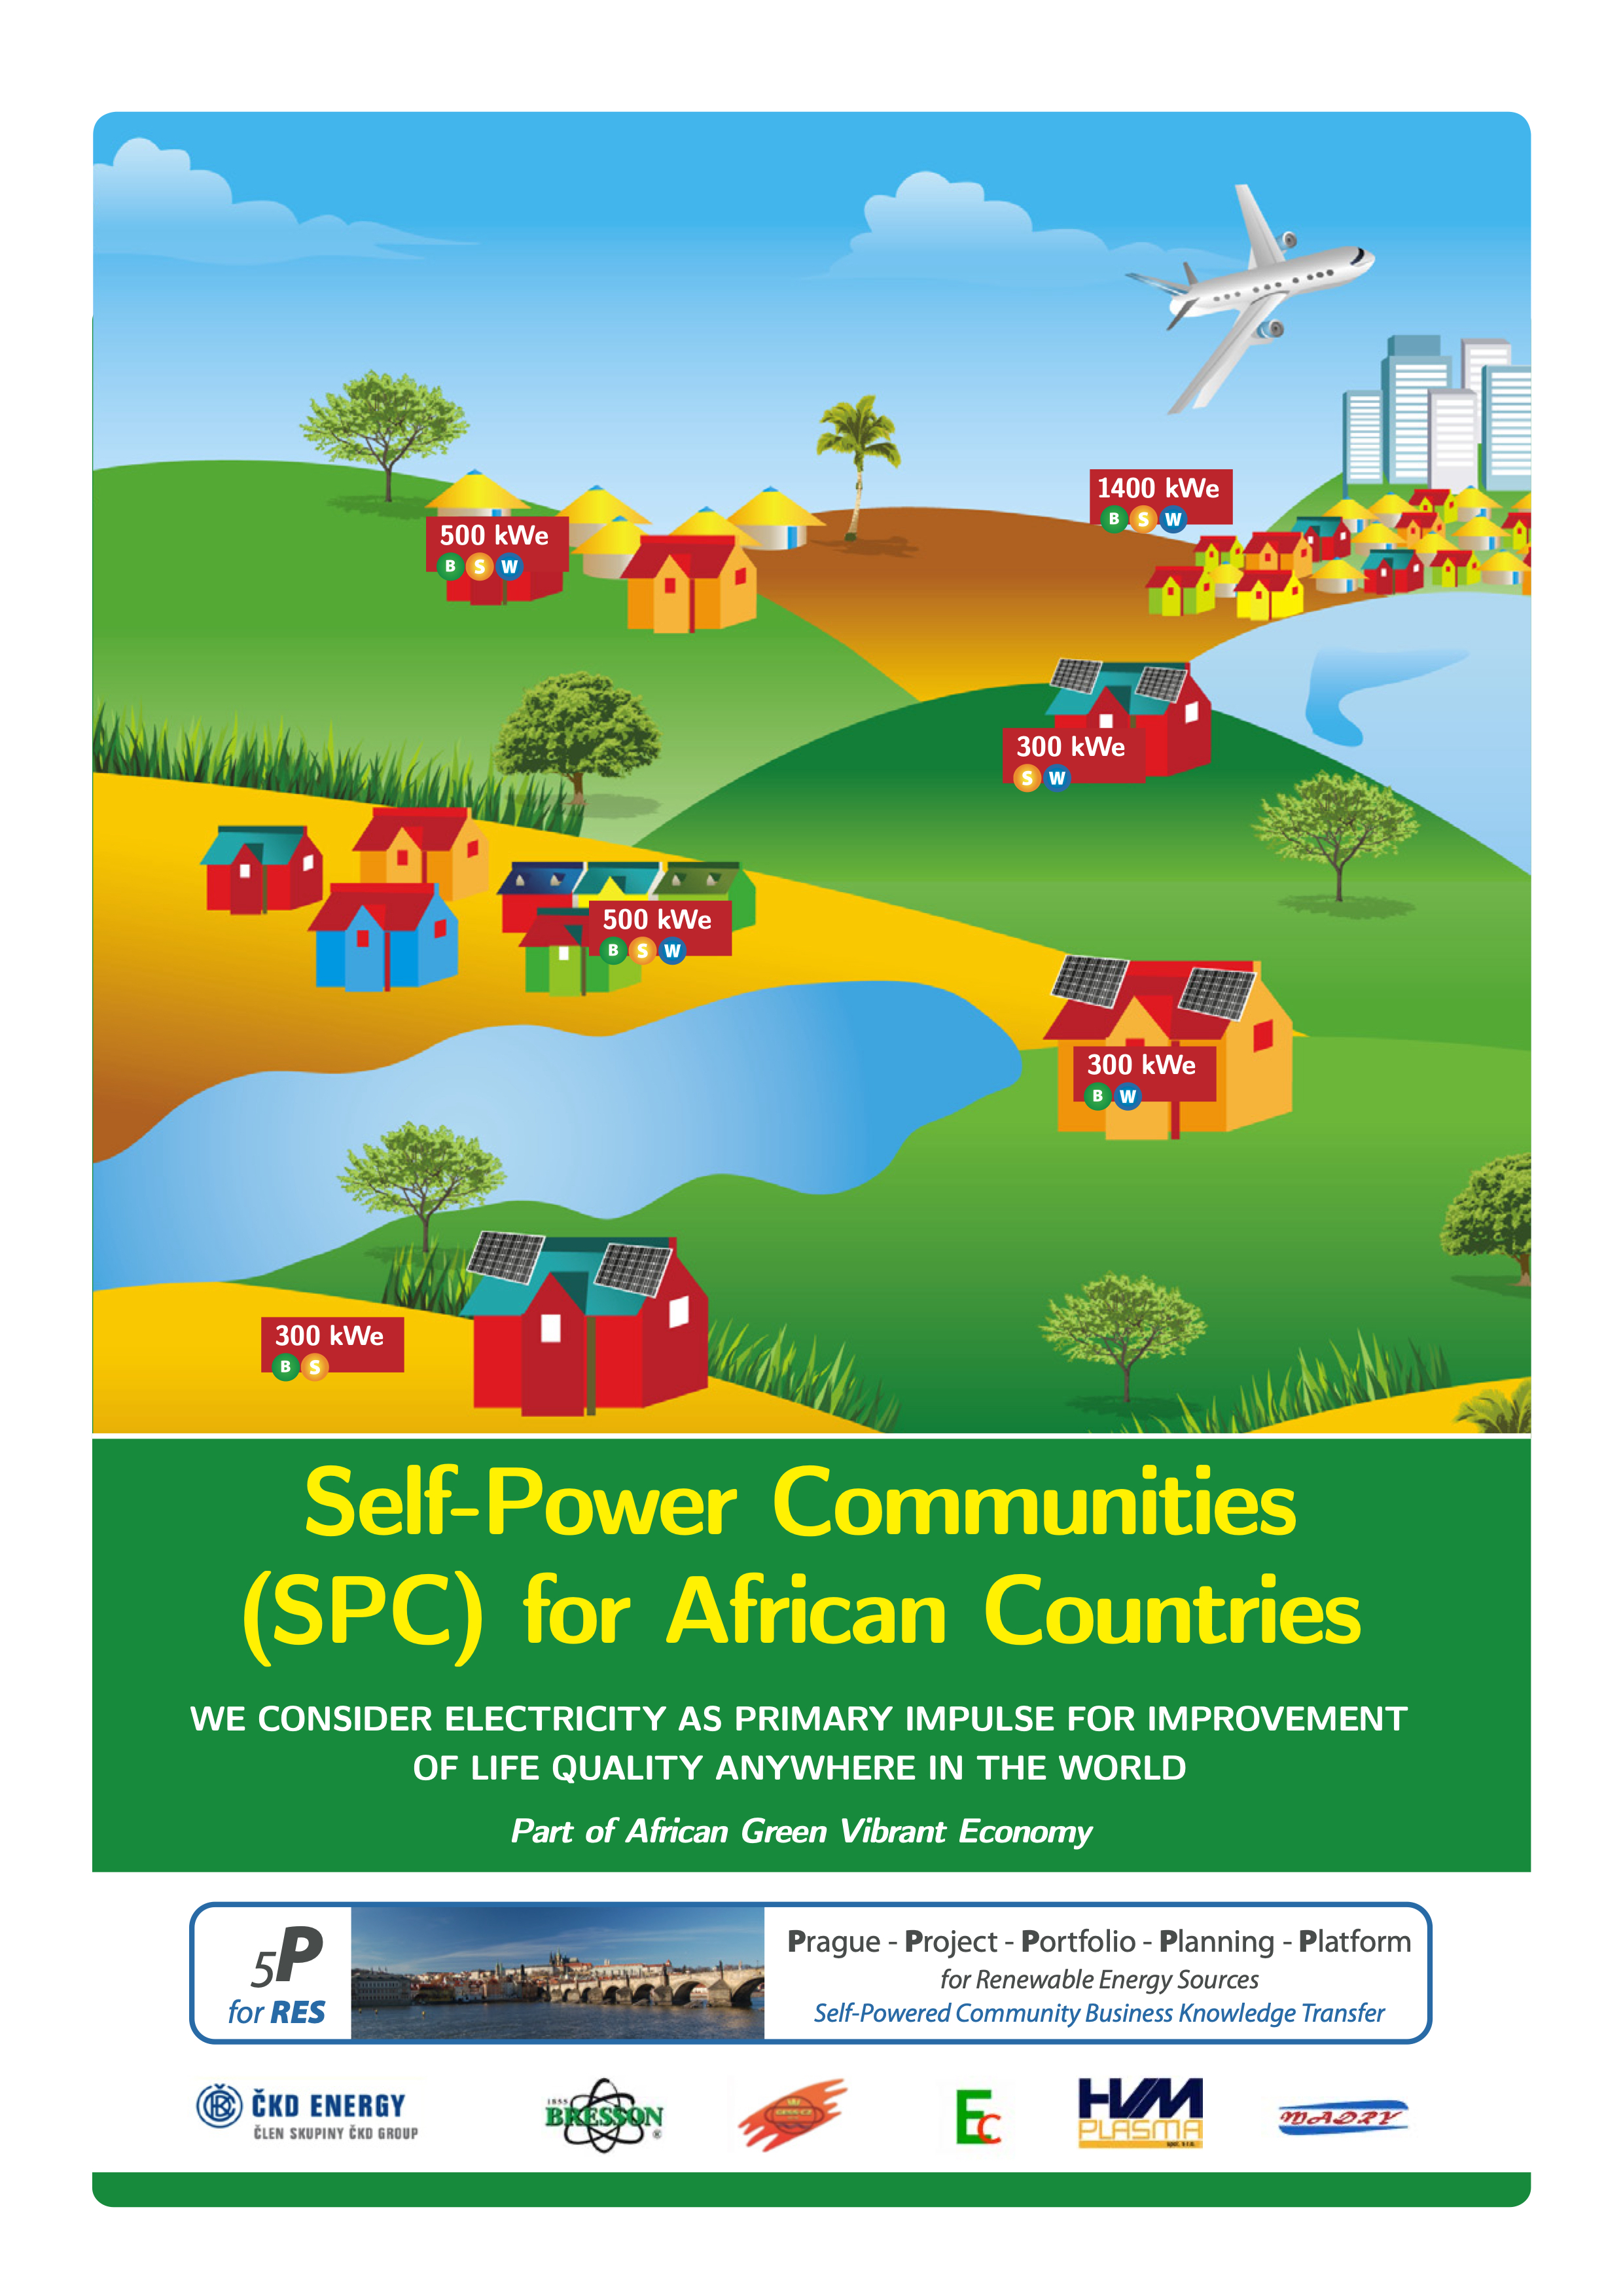 SPC for African Countries